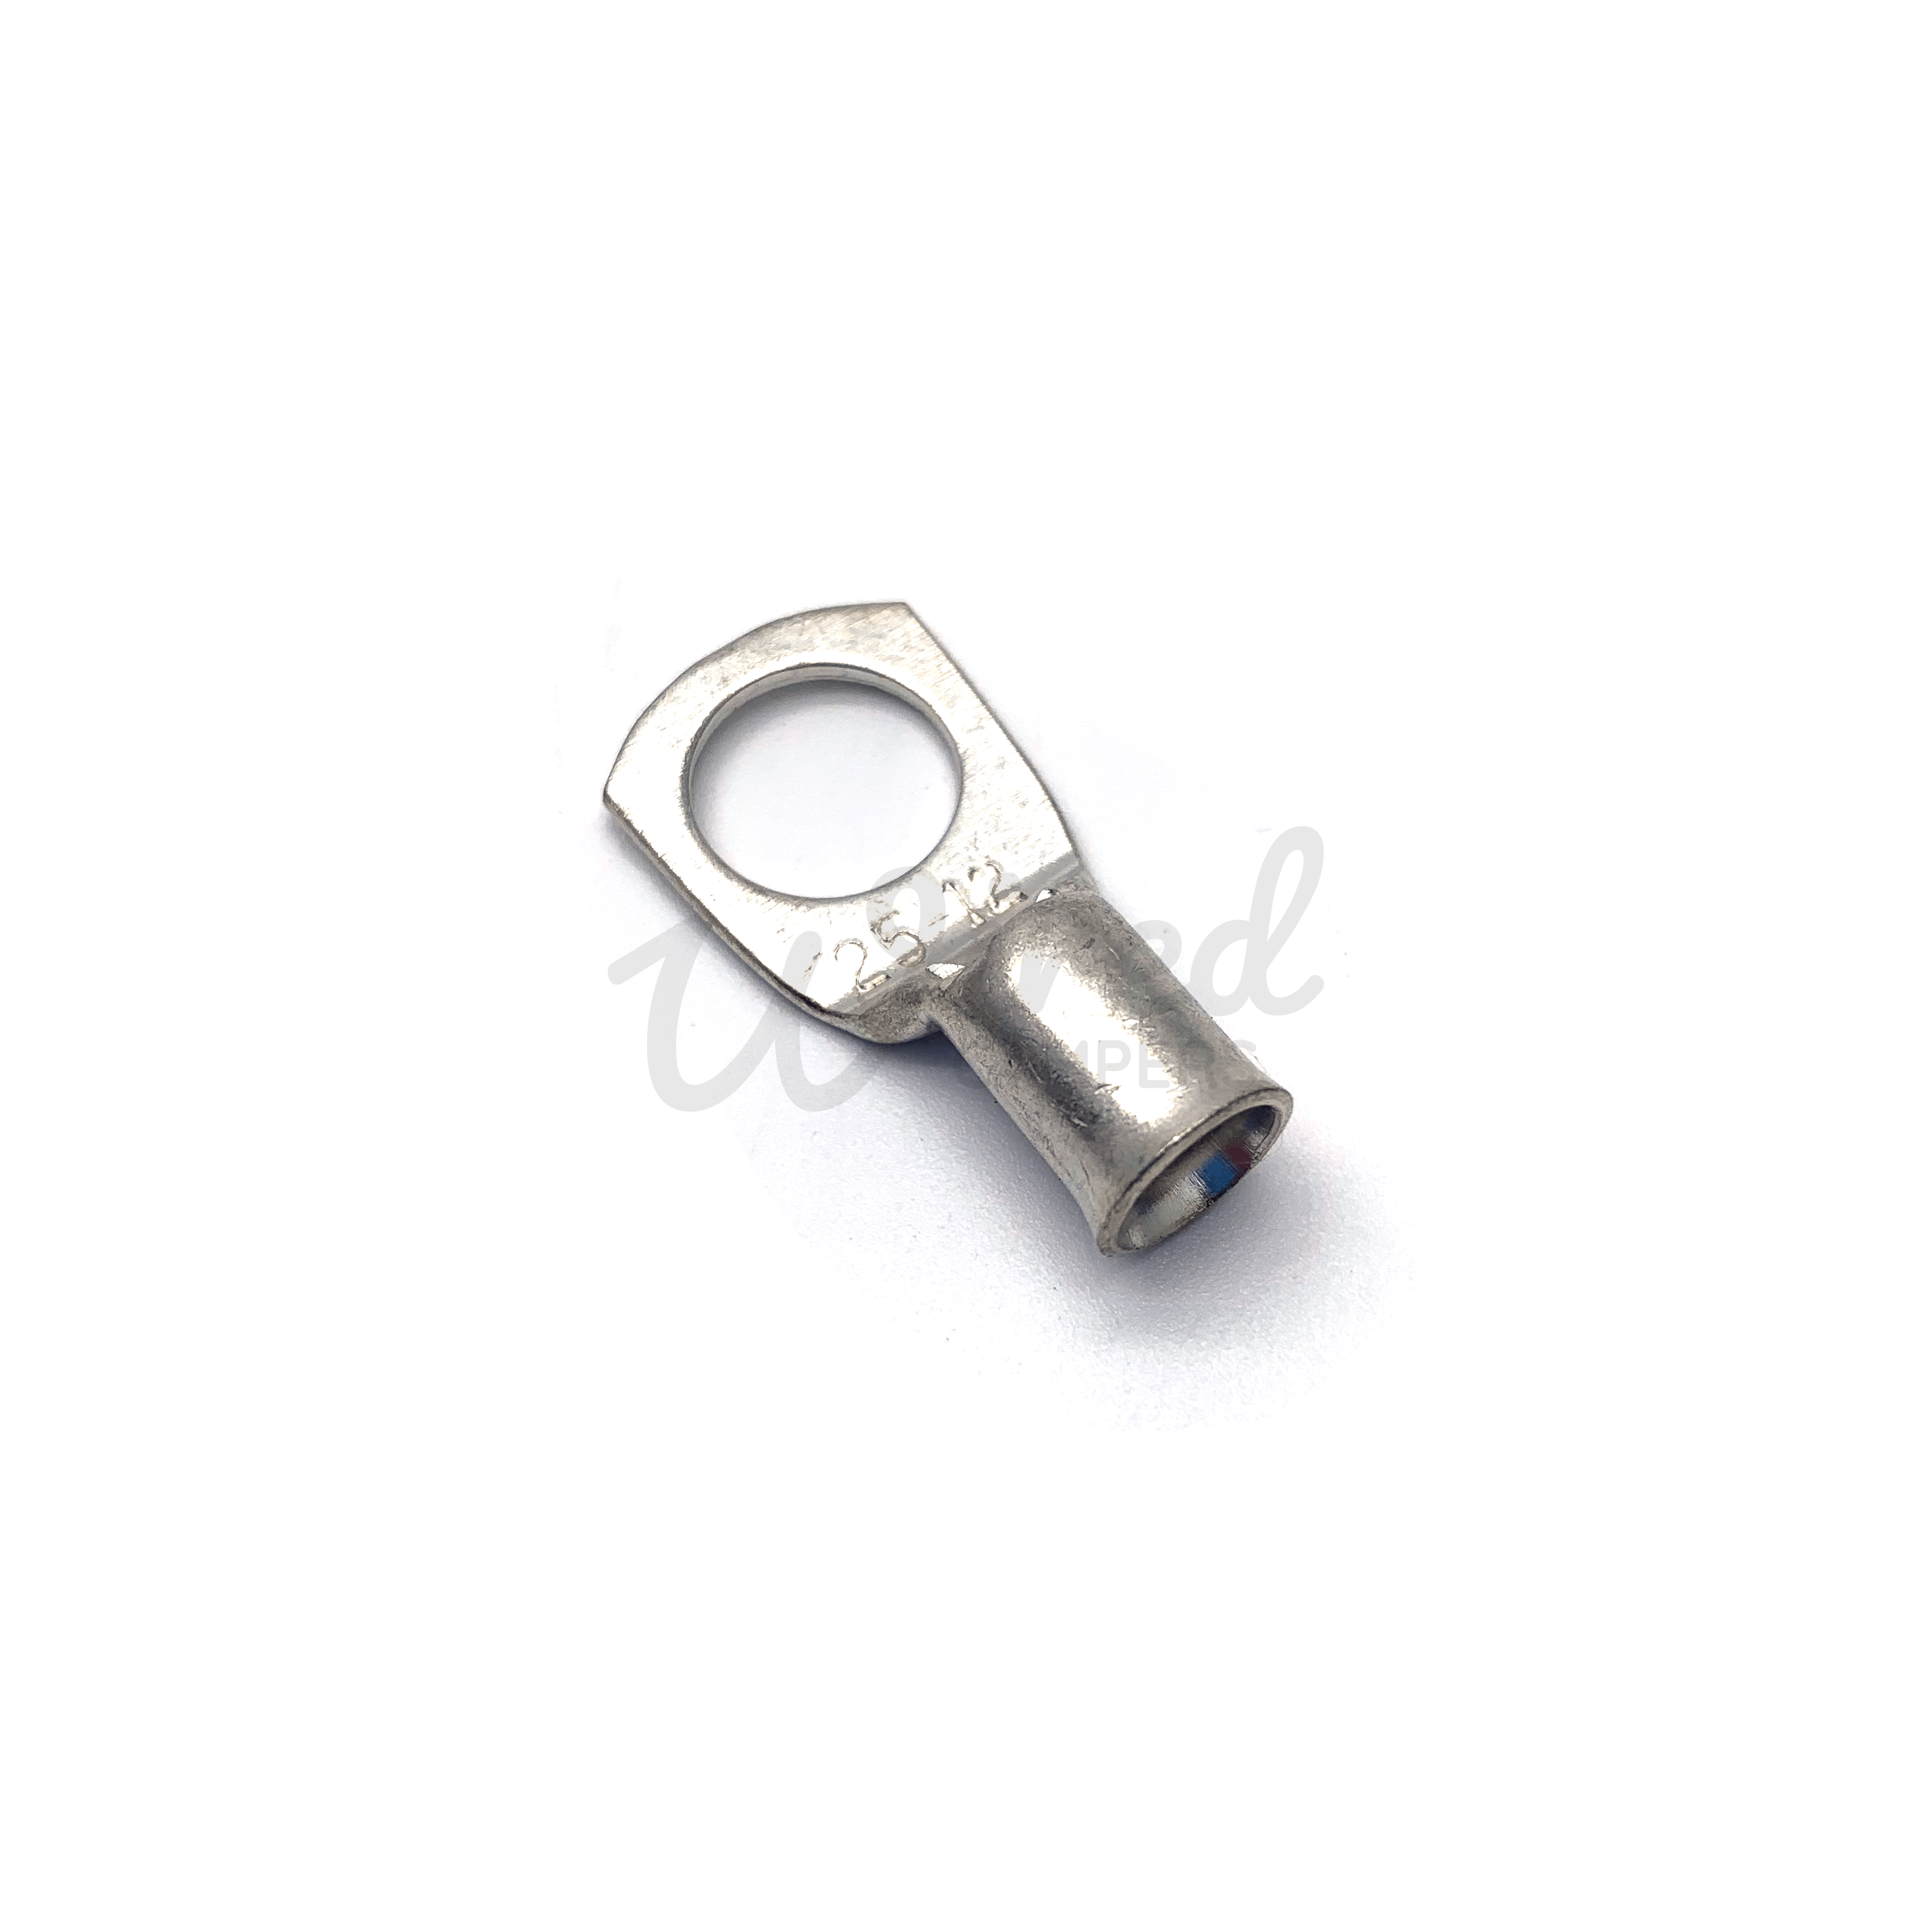 Wired Campers Limited 12mm 10 Pack - Copper Tube Crimp Ring Terminals 25mm² Cable Entry - 6mm/8mm/10mm/12mm Hole